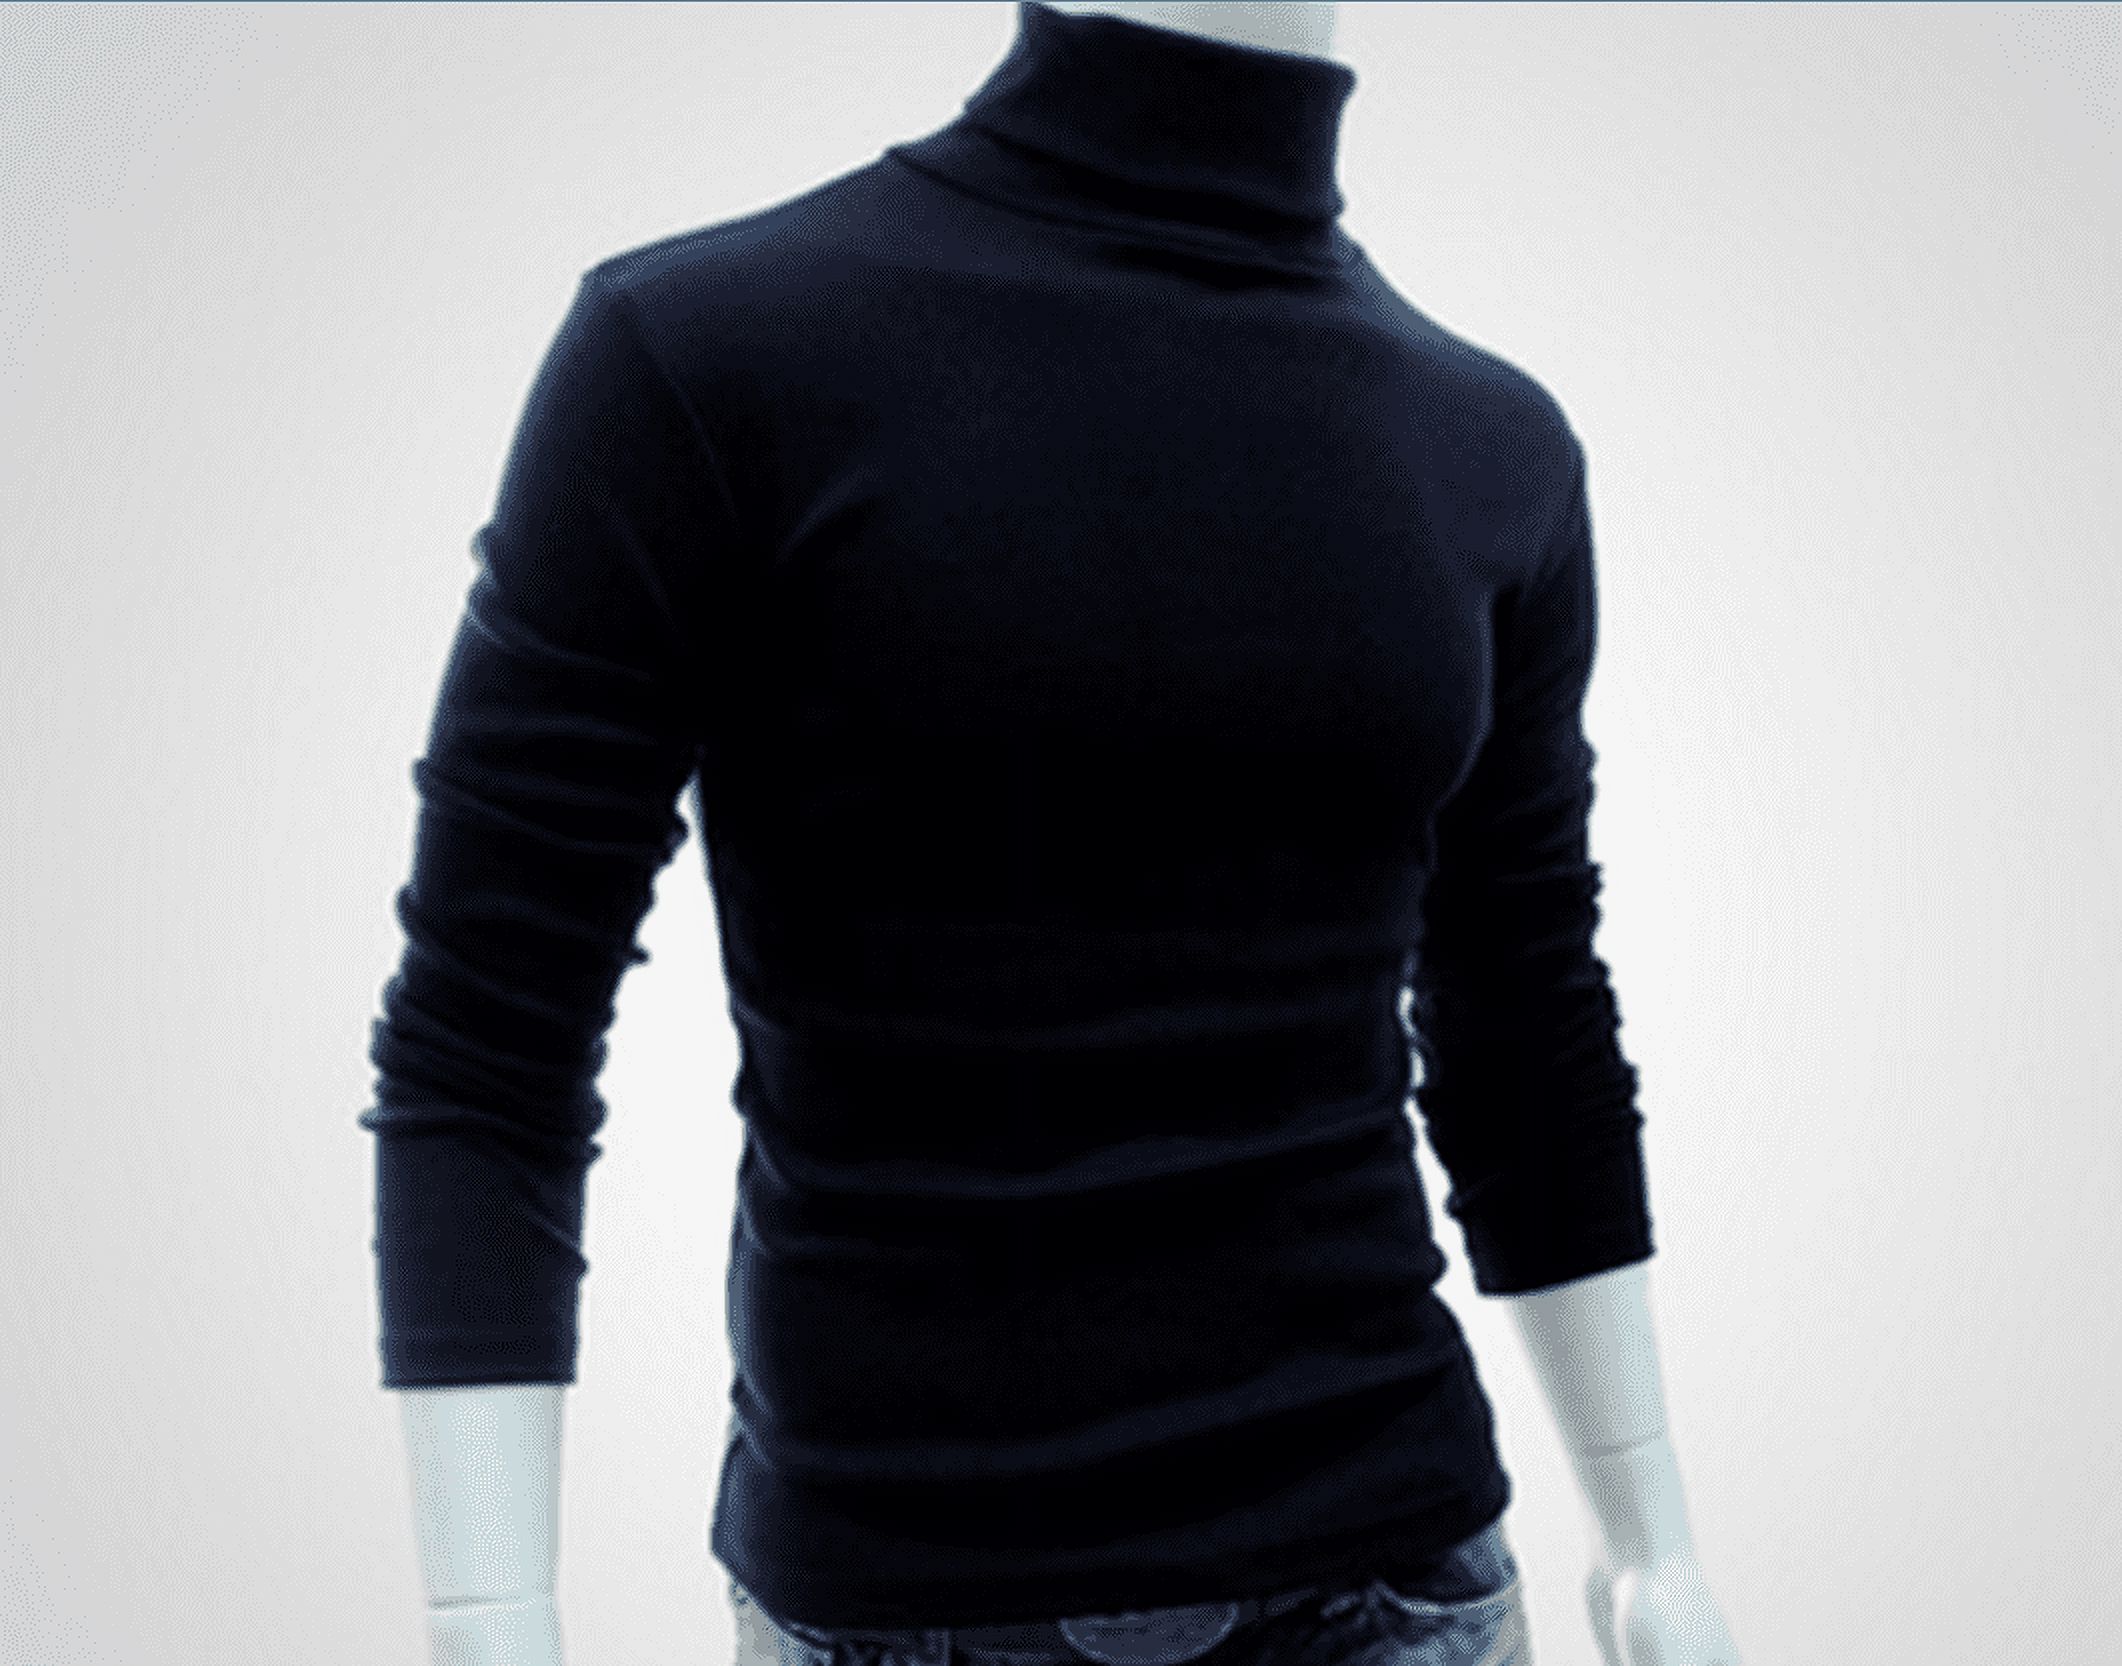 Seyurigaoka Fashion Mens Polo Roll Turtle Neck Pullover Knitted Jumper Tops Sweater Shirt - image 1 of 6